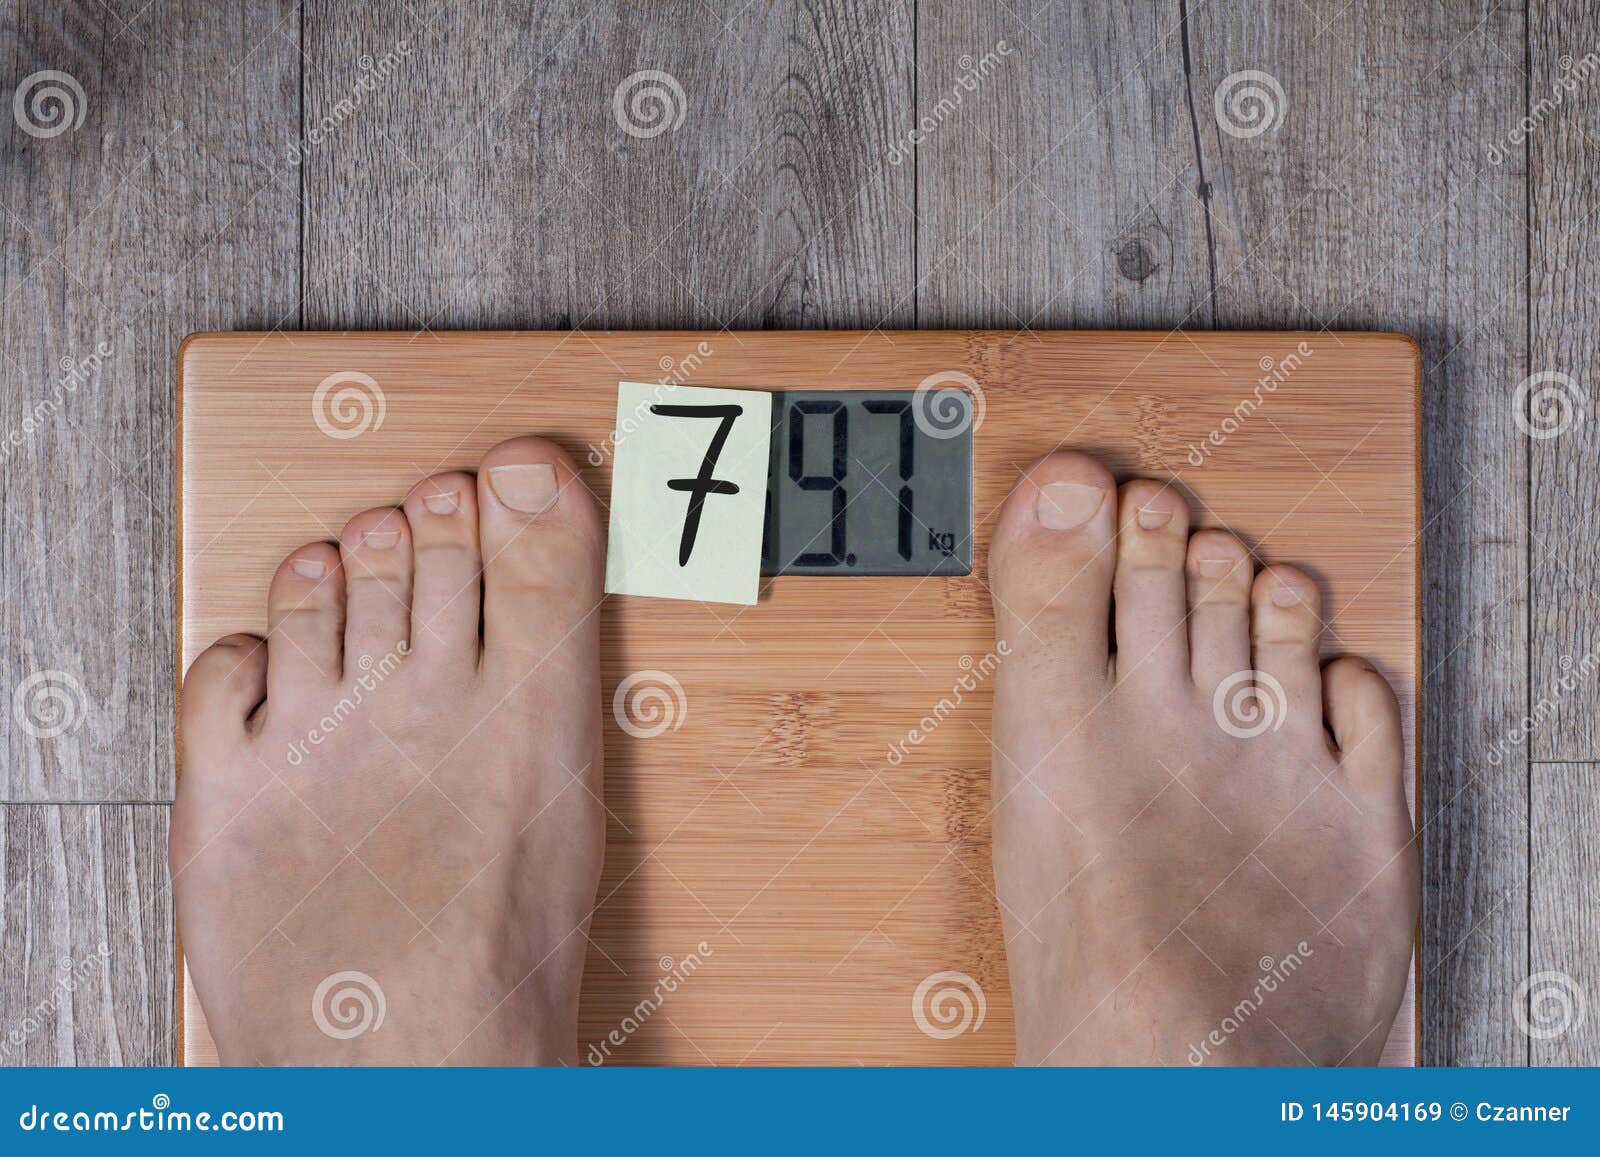 Funny weight concept stock image. Image of male, healthy - 145904169